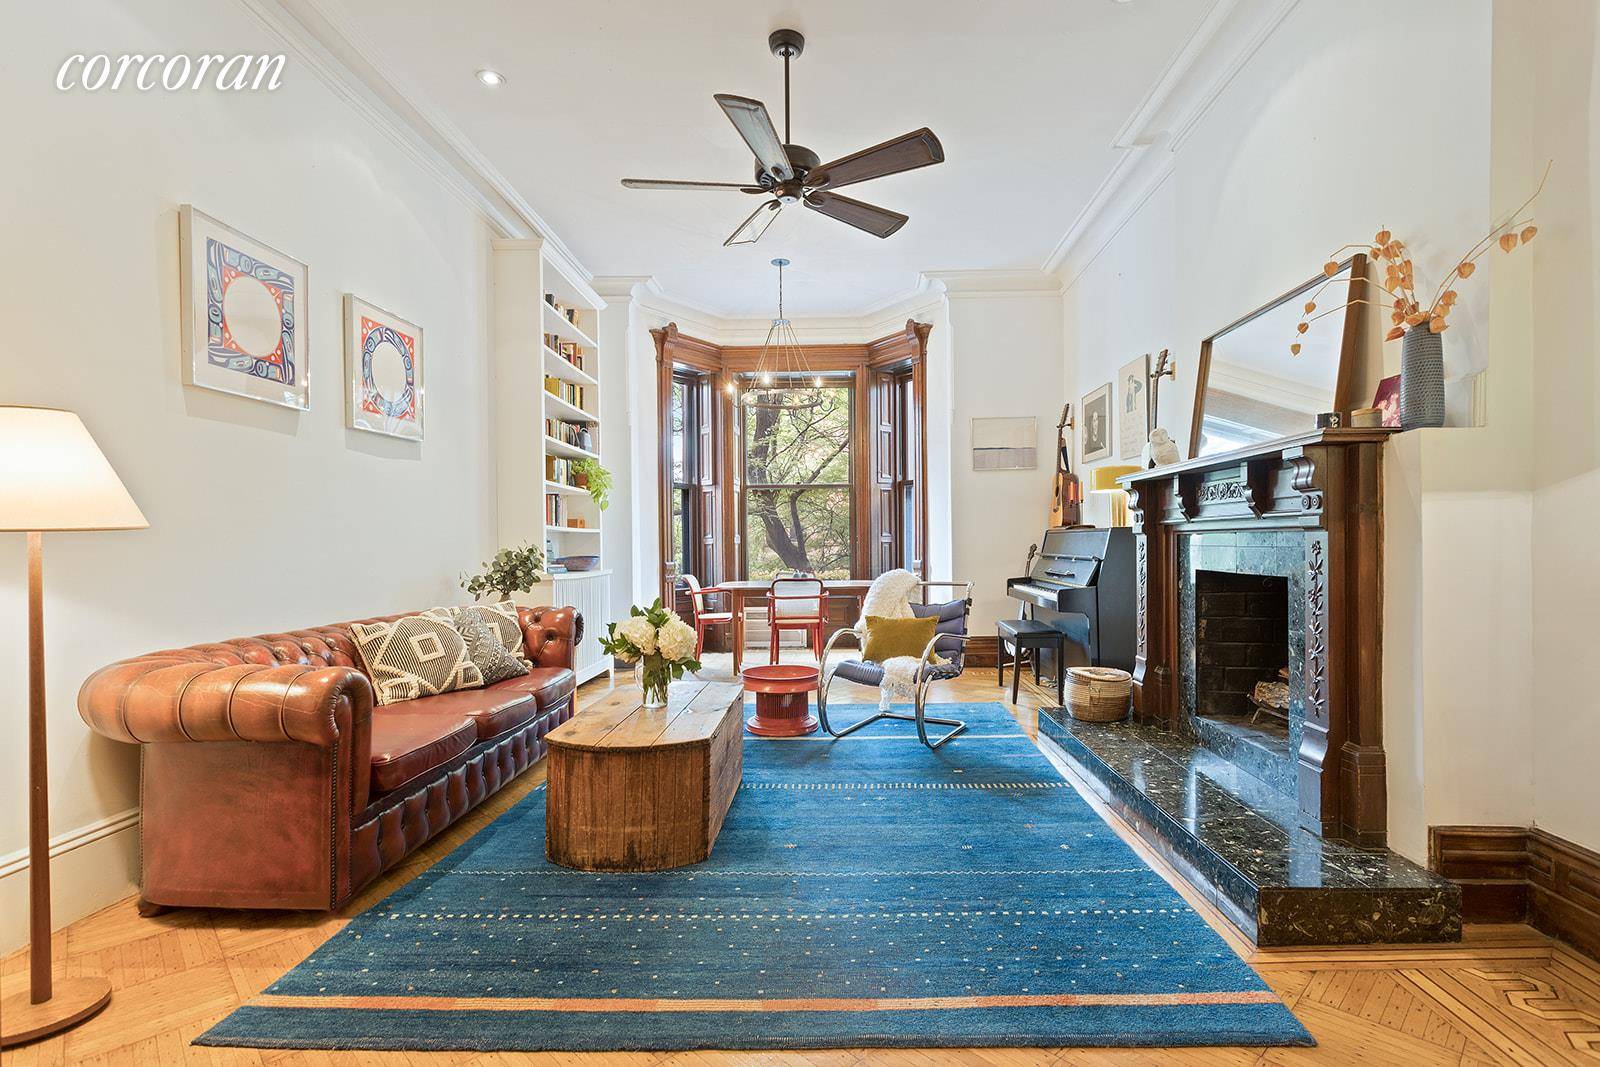 22 8th Avenue, Apt 2 Thoughtfully designed and generously proportioned at over 1400 square feet, this floor through apartment occupies the second floor of The Classic Brooklyn Brownstone.